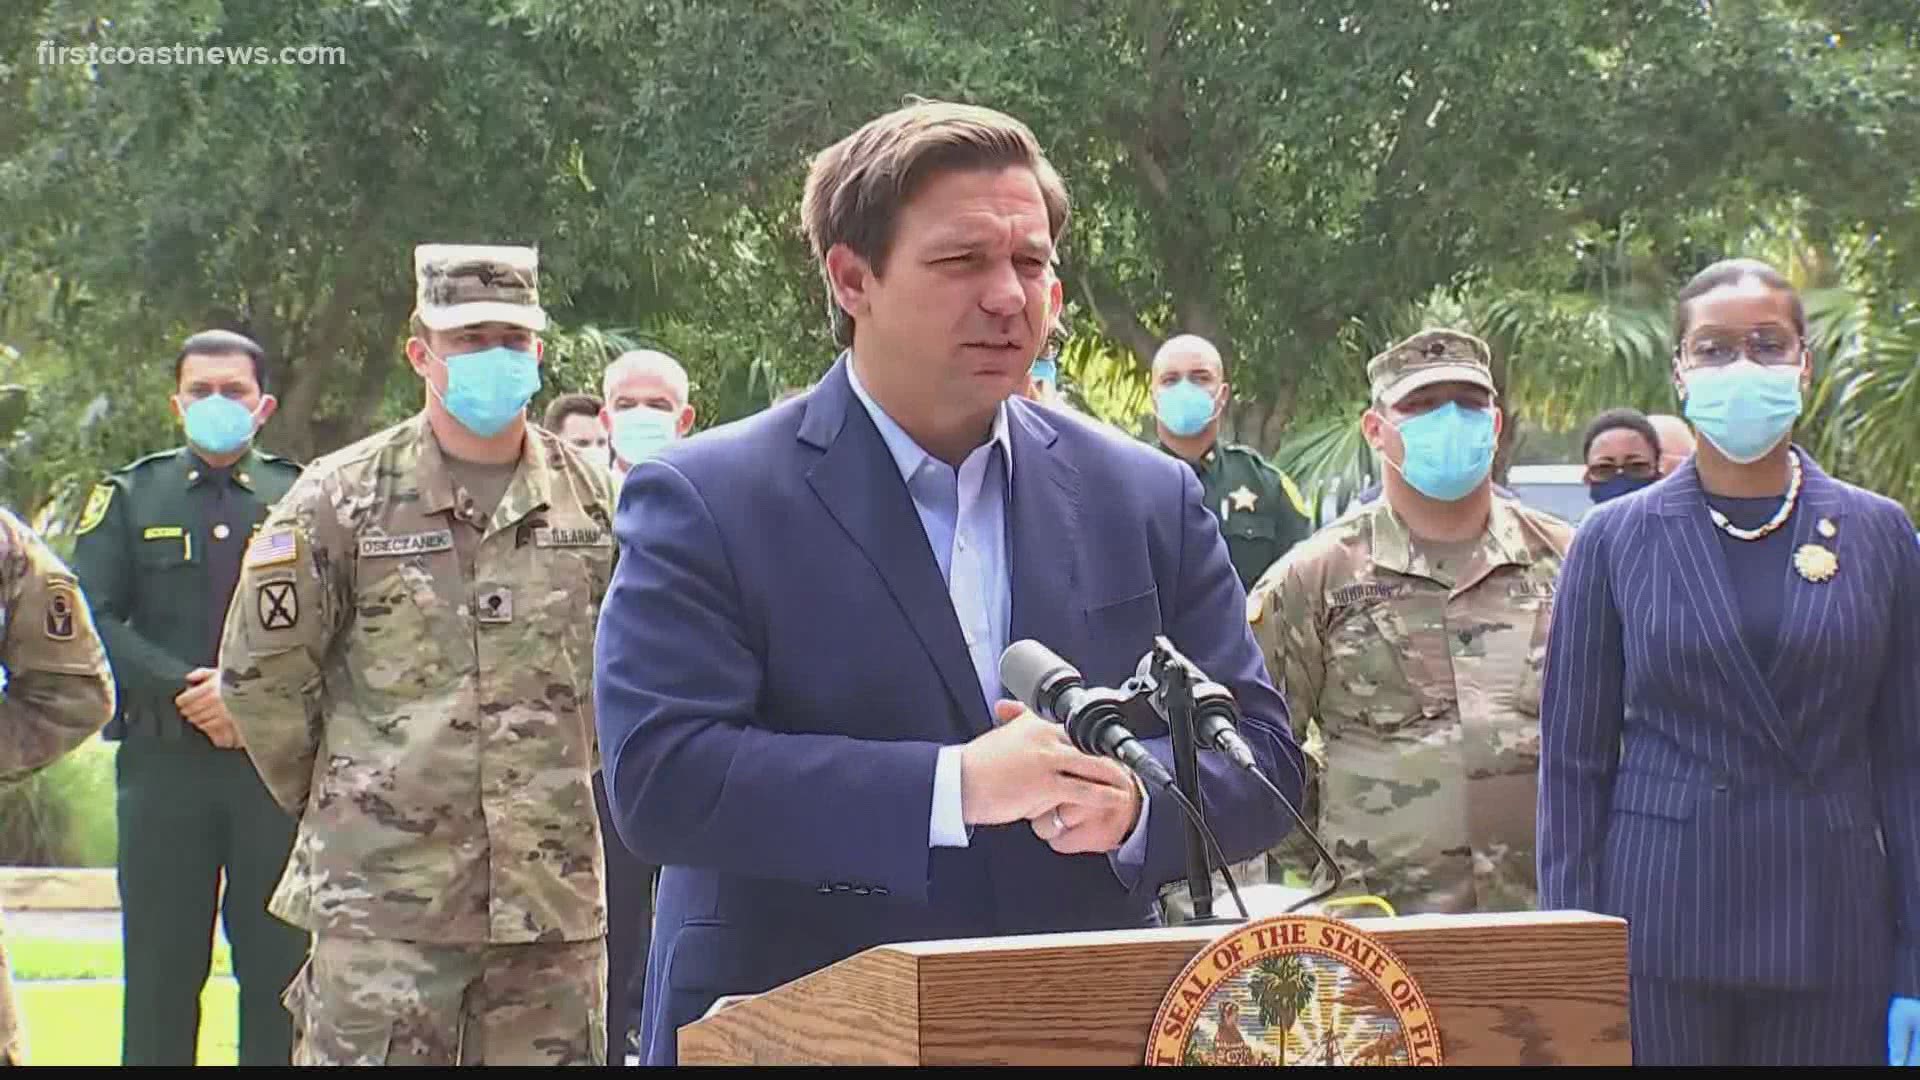 DeSantis announced his own state task force after President Trump’s team offered guidelines, leaving the decision making to governors.